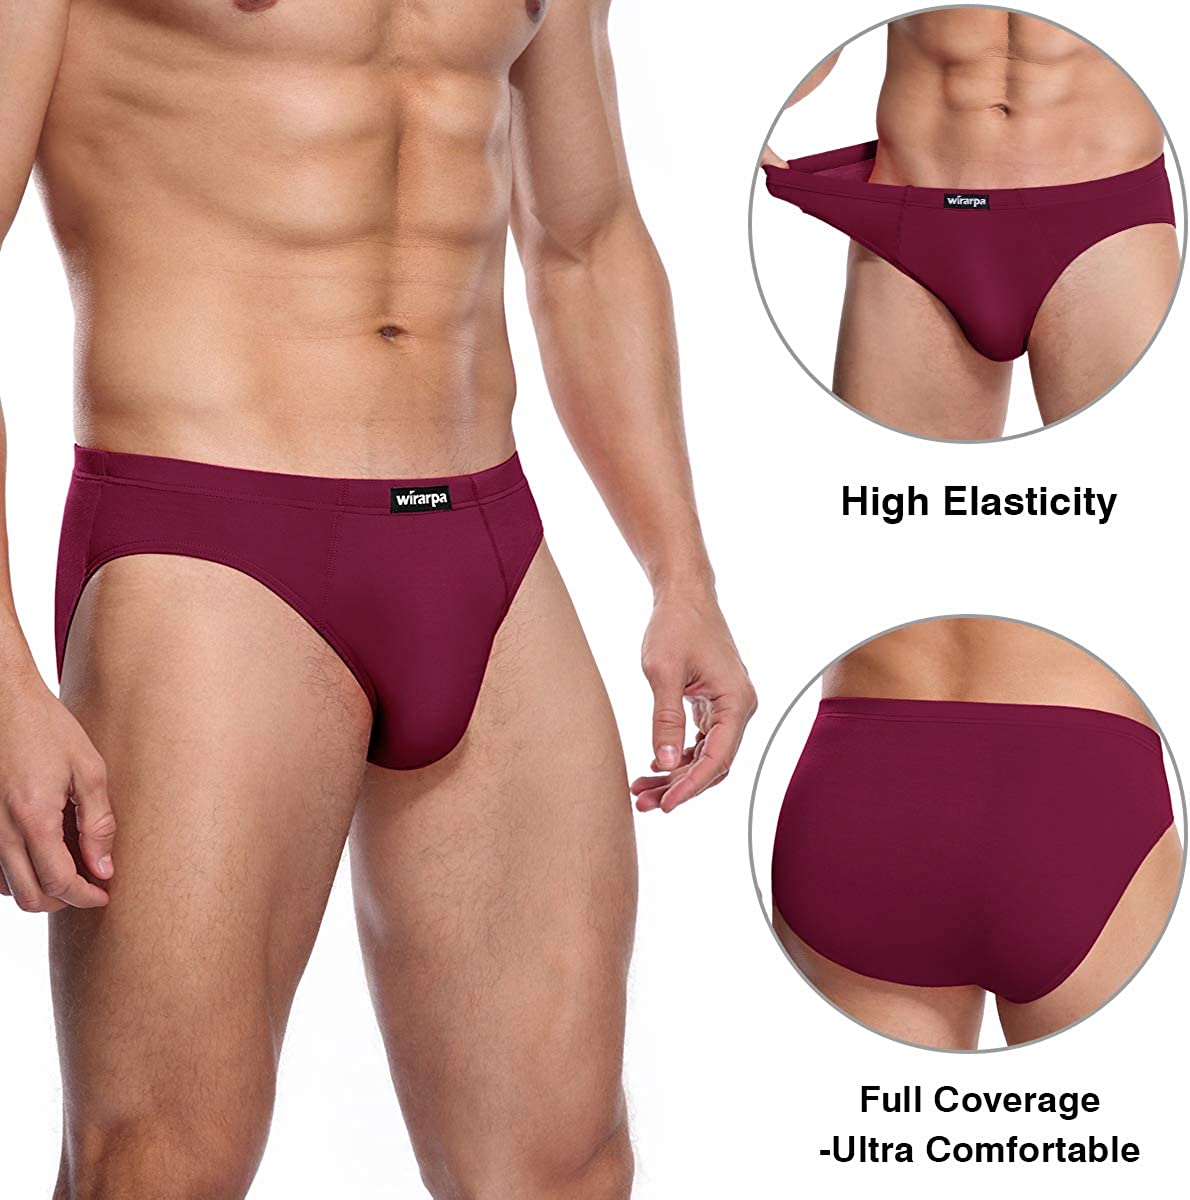  Wirarpa Mens Breathable Modal Microfiber Trunks Underwear  Covered Band Multipack